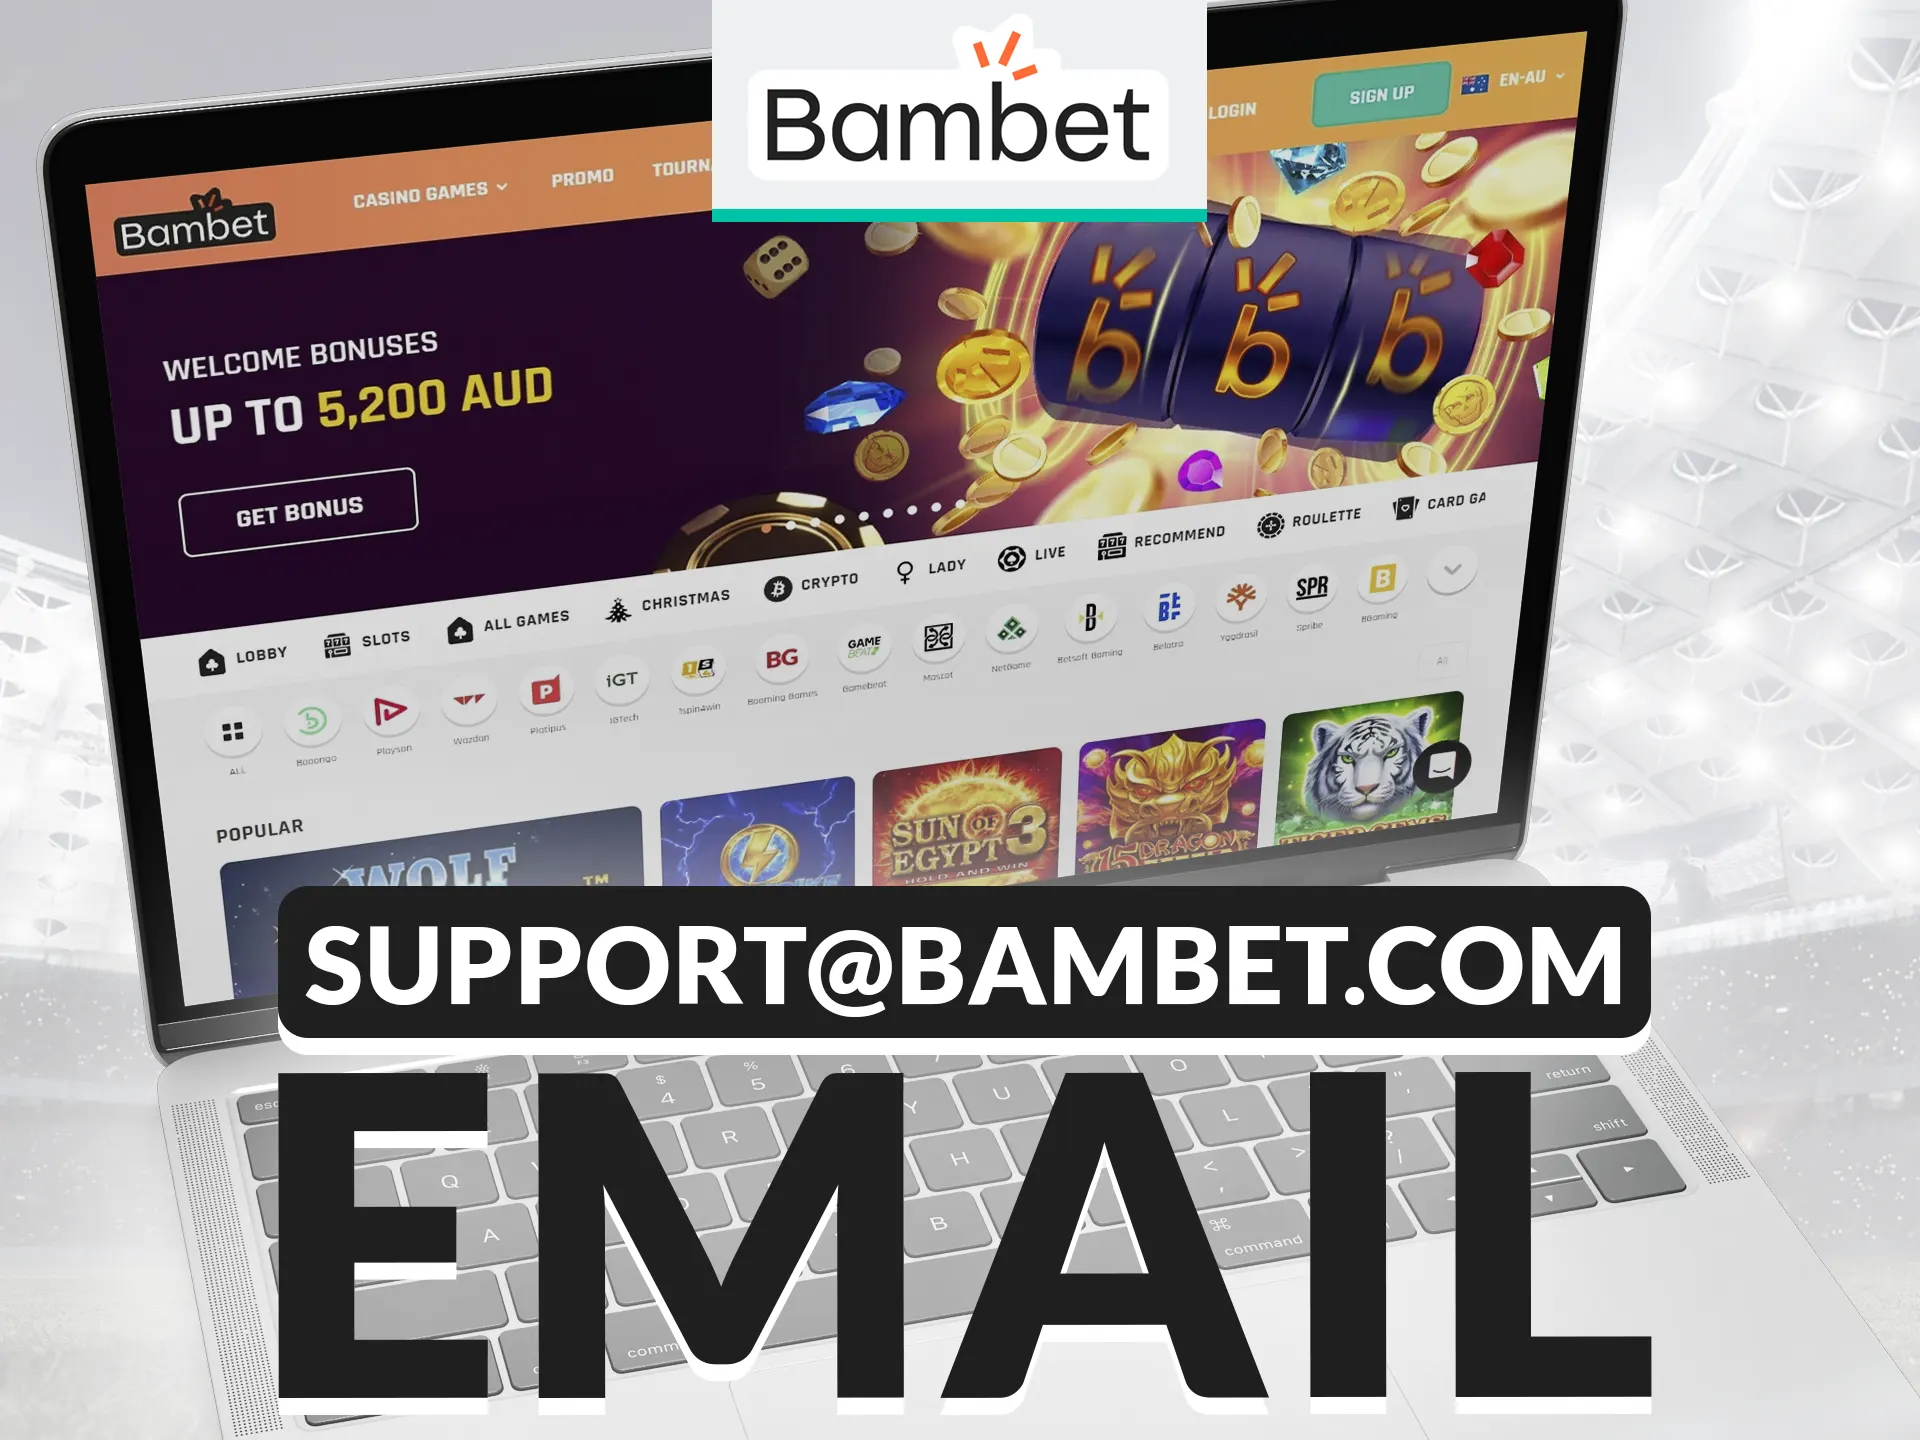 Use the opportunity to contact with Bambet through email.